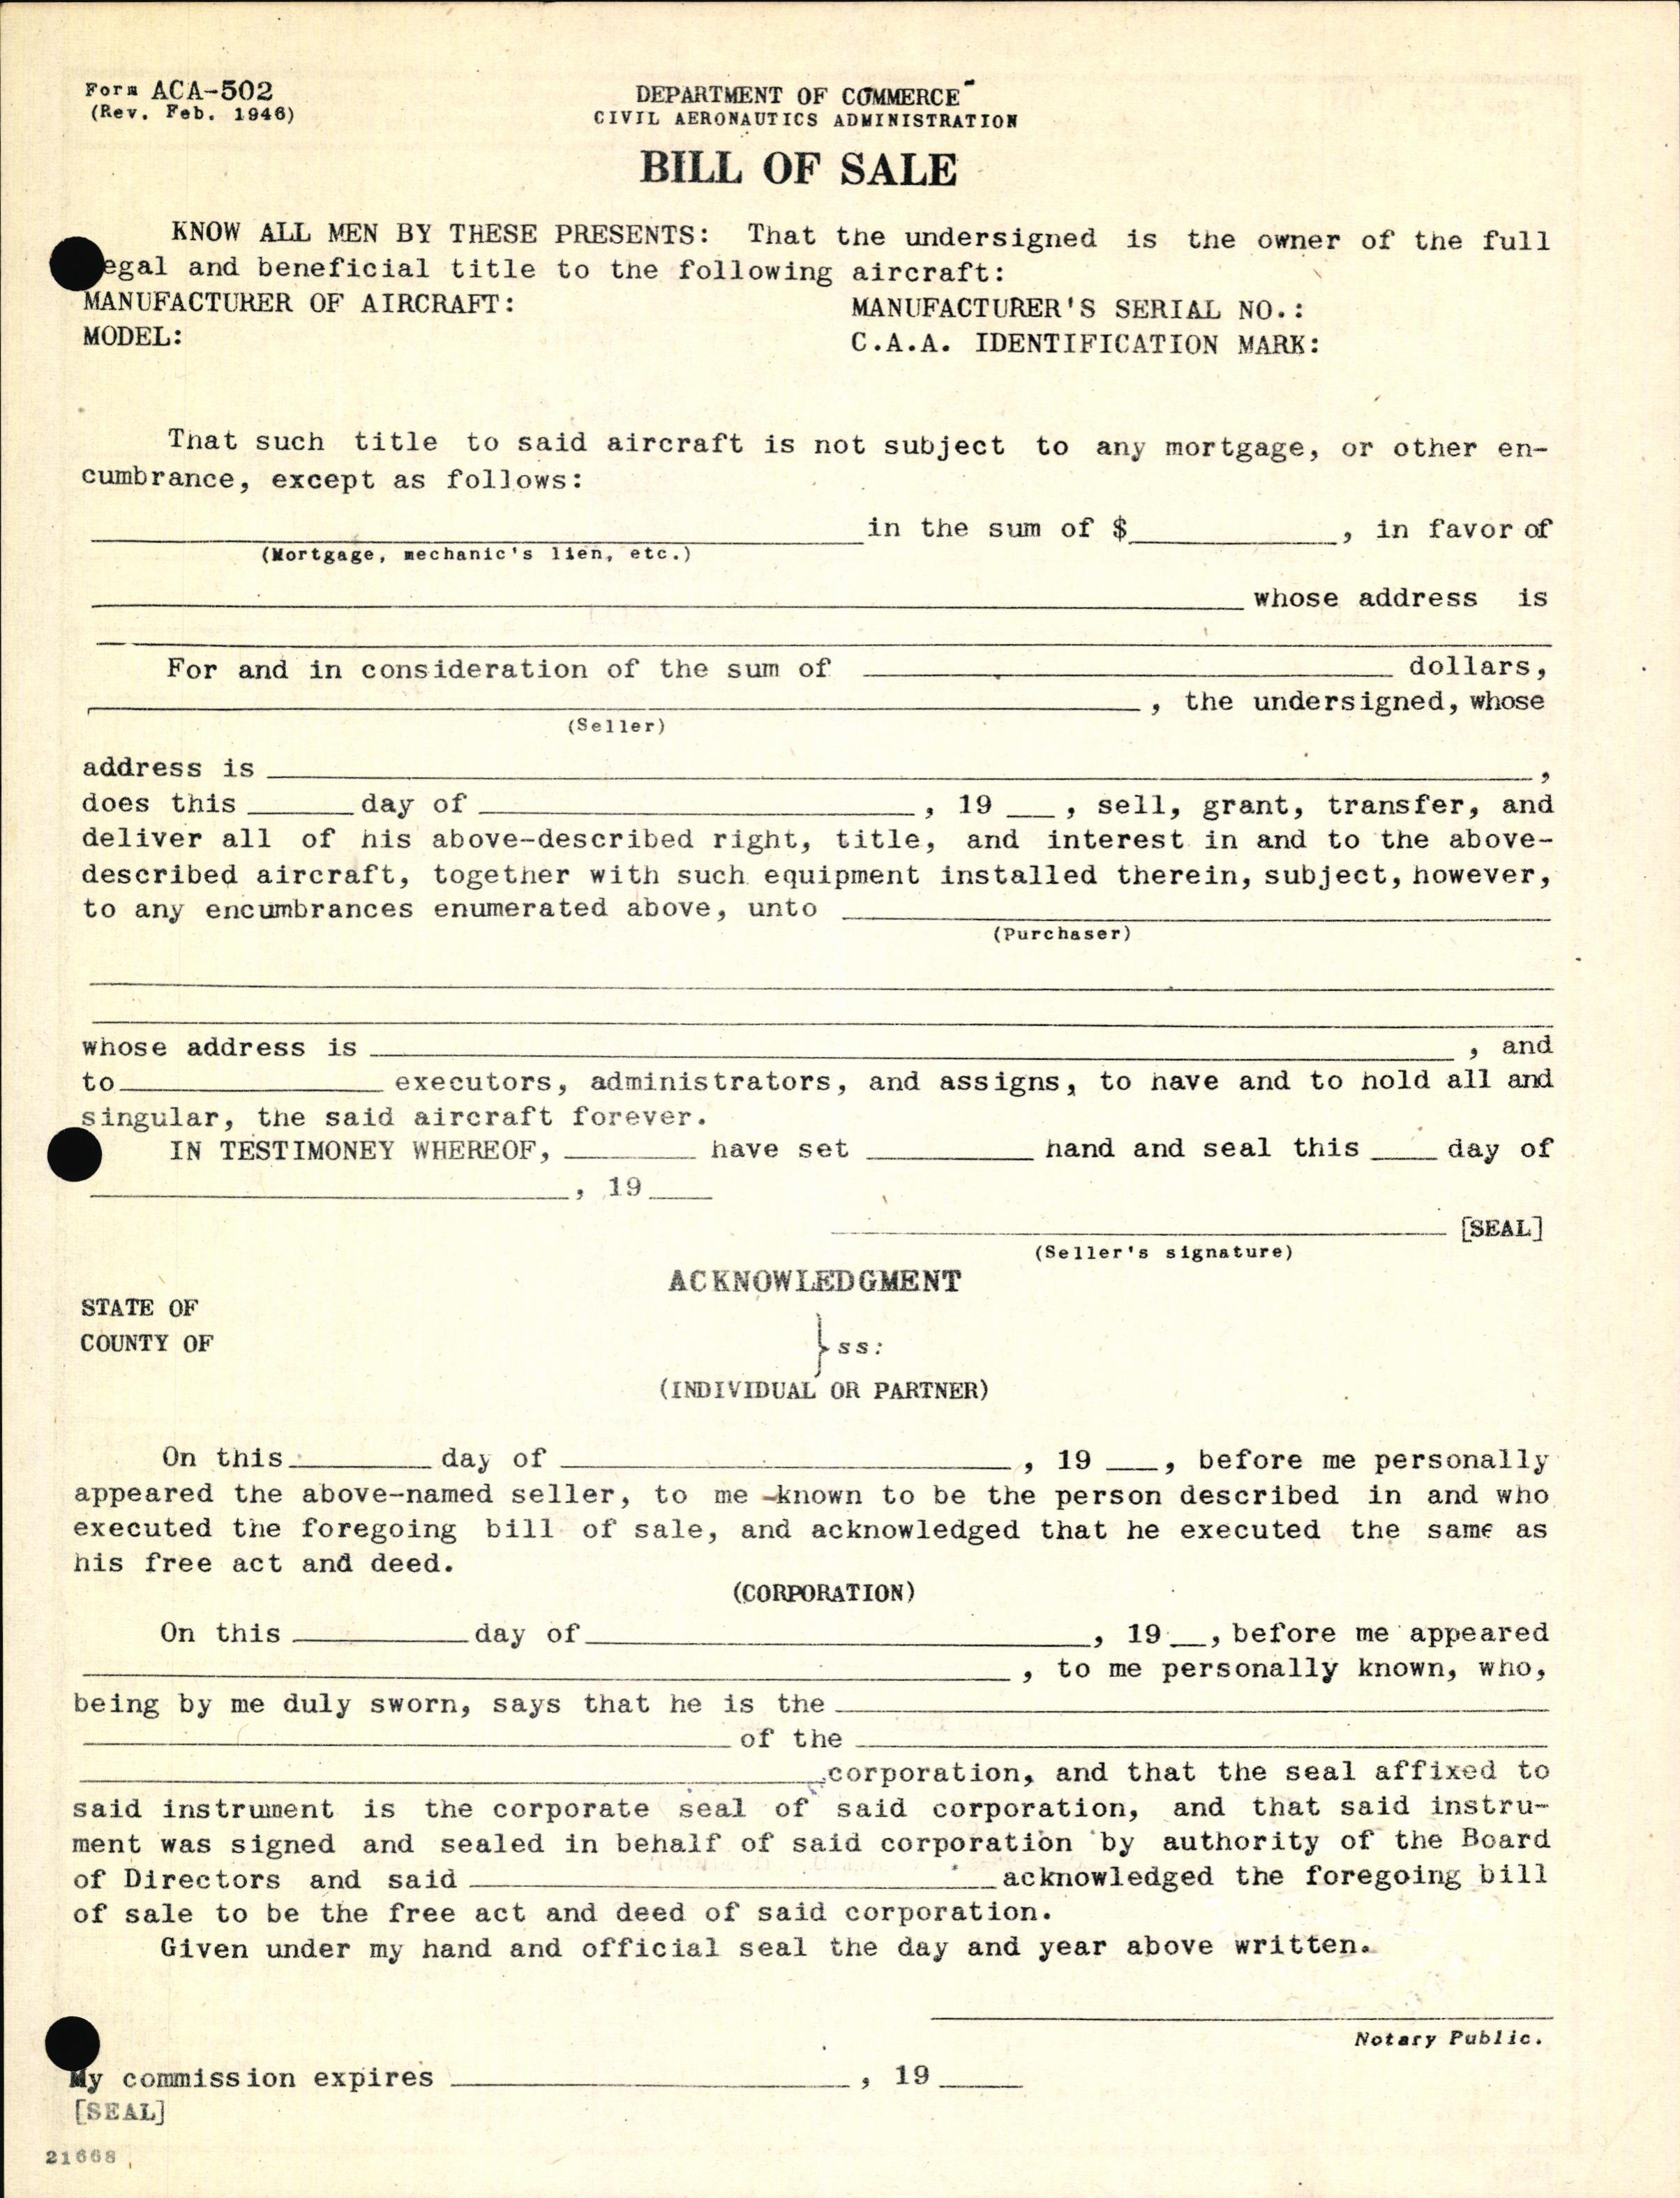 Sample page 4 from AirCorps Library document: Technical Information for Serial Number 2111